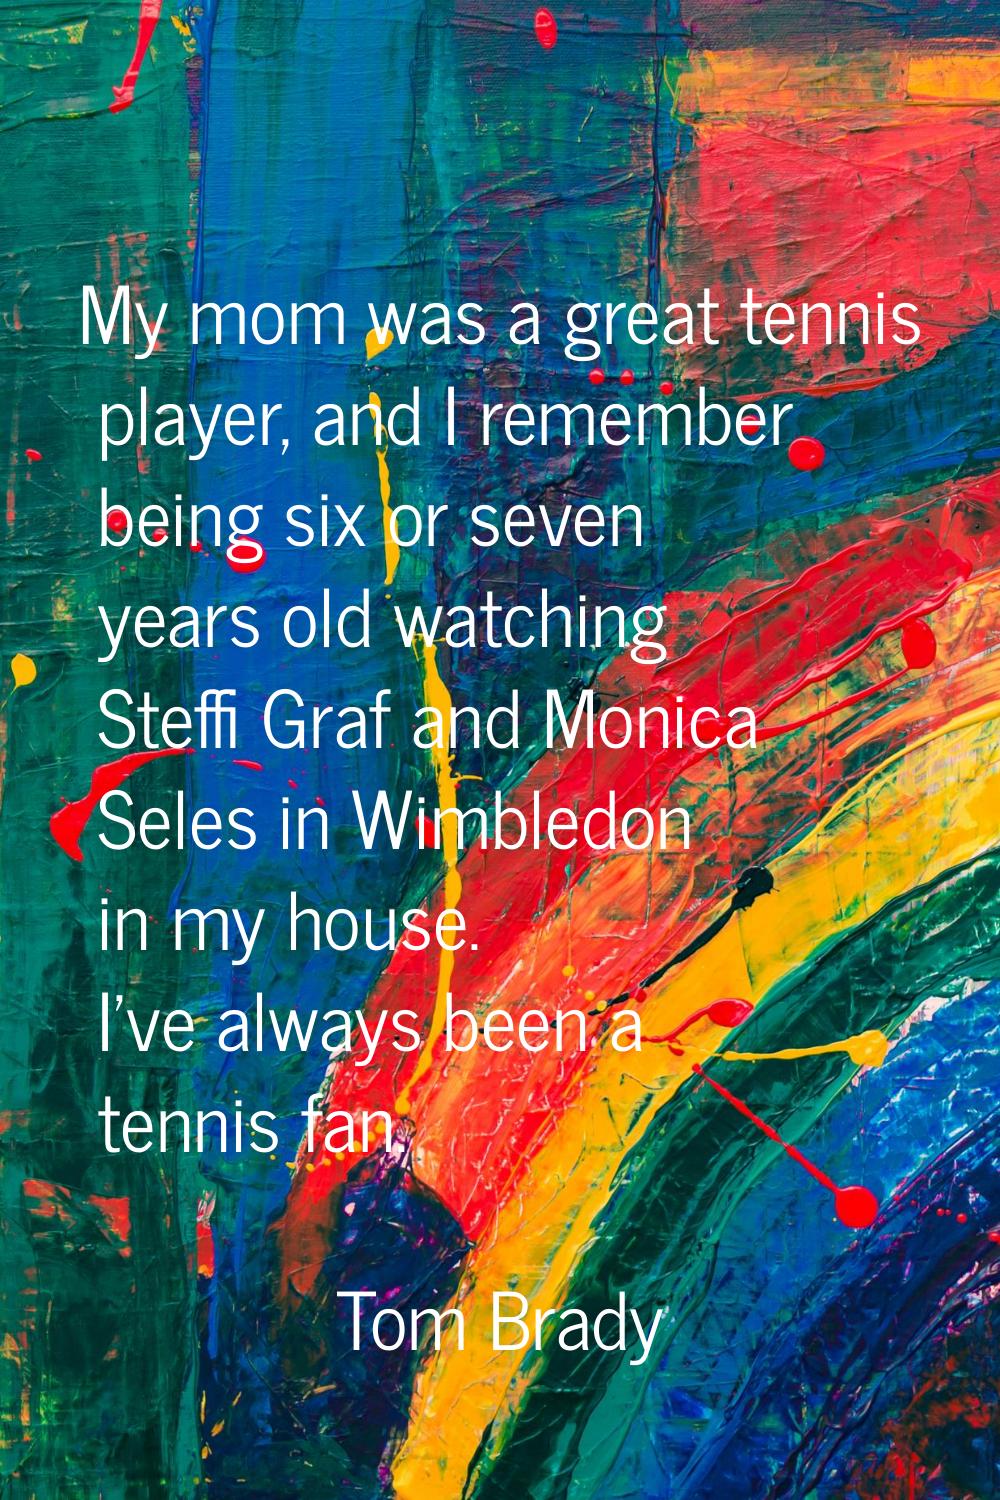 My mom was a great tennis player, and I remember being six or seven years old watching Steffi Graf 